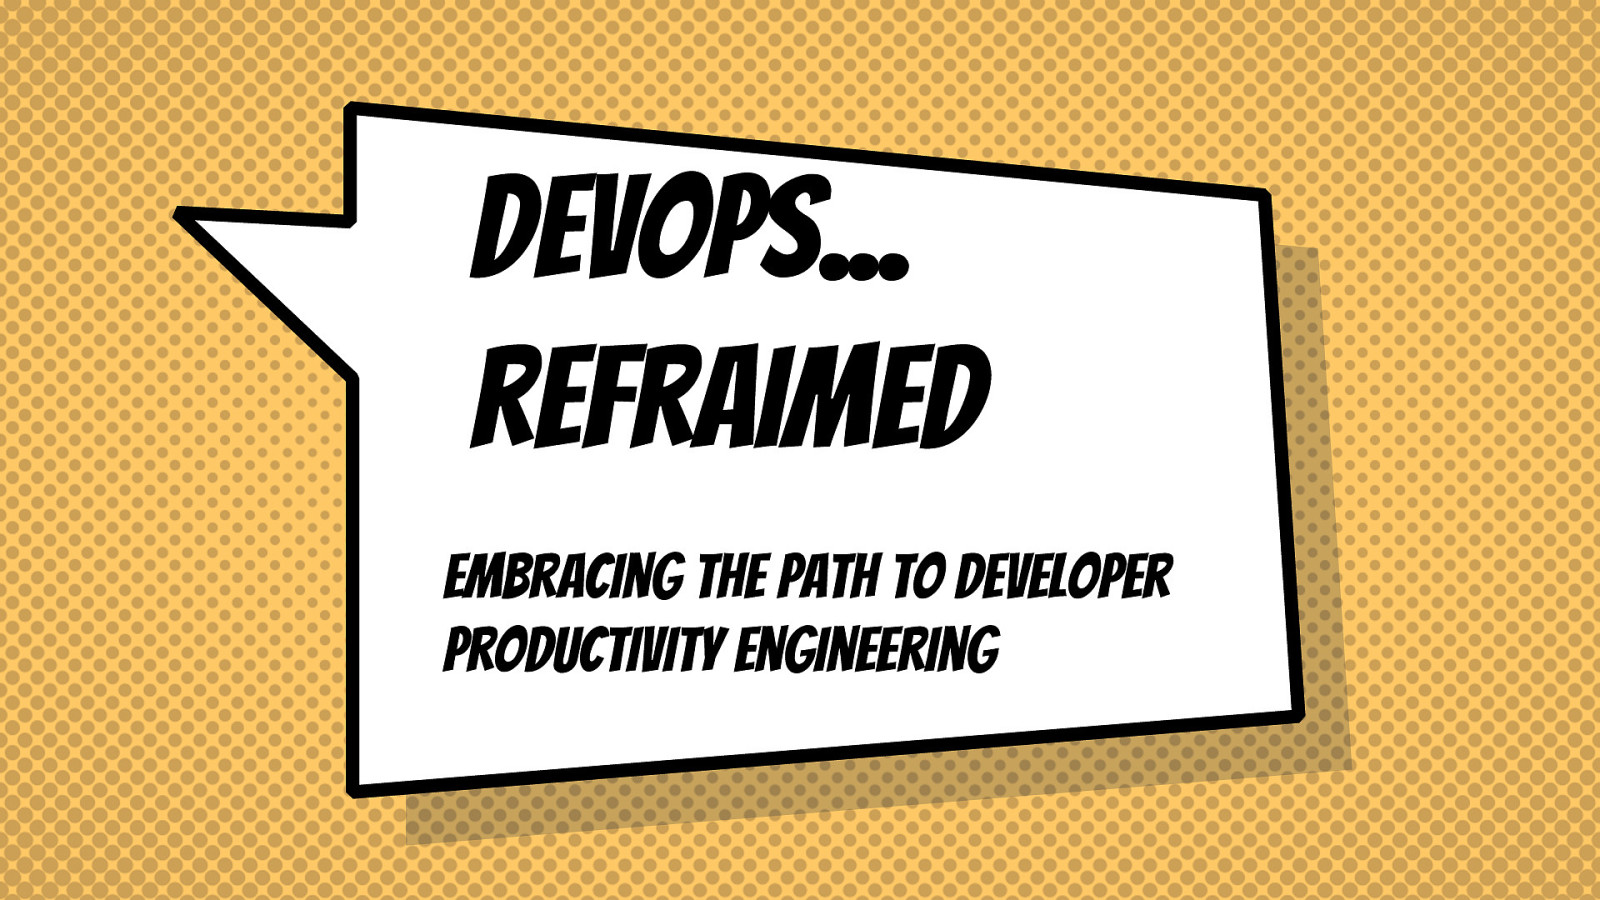 DevOps Reframed: Embracing the Path to Developer Productivity Engineering